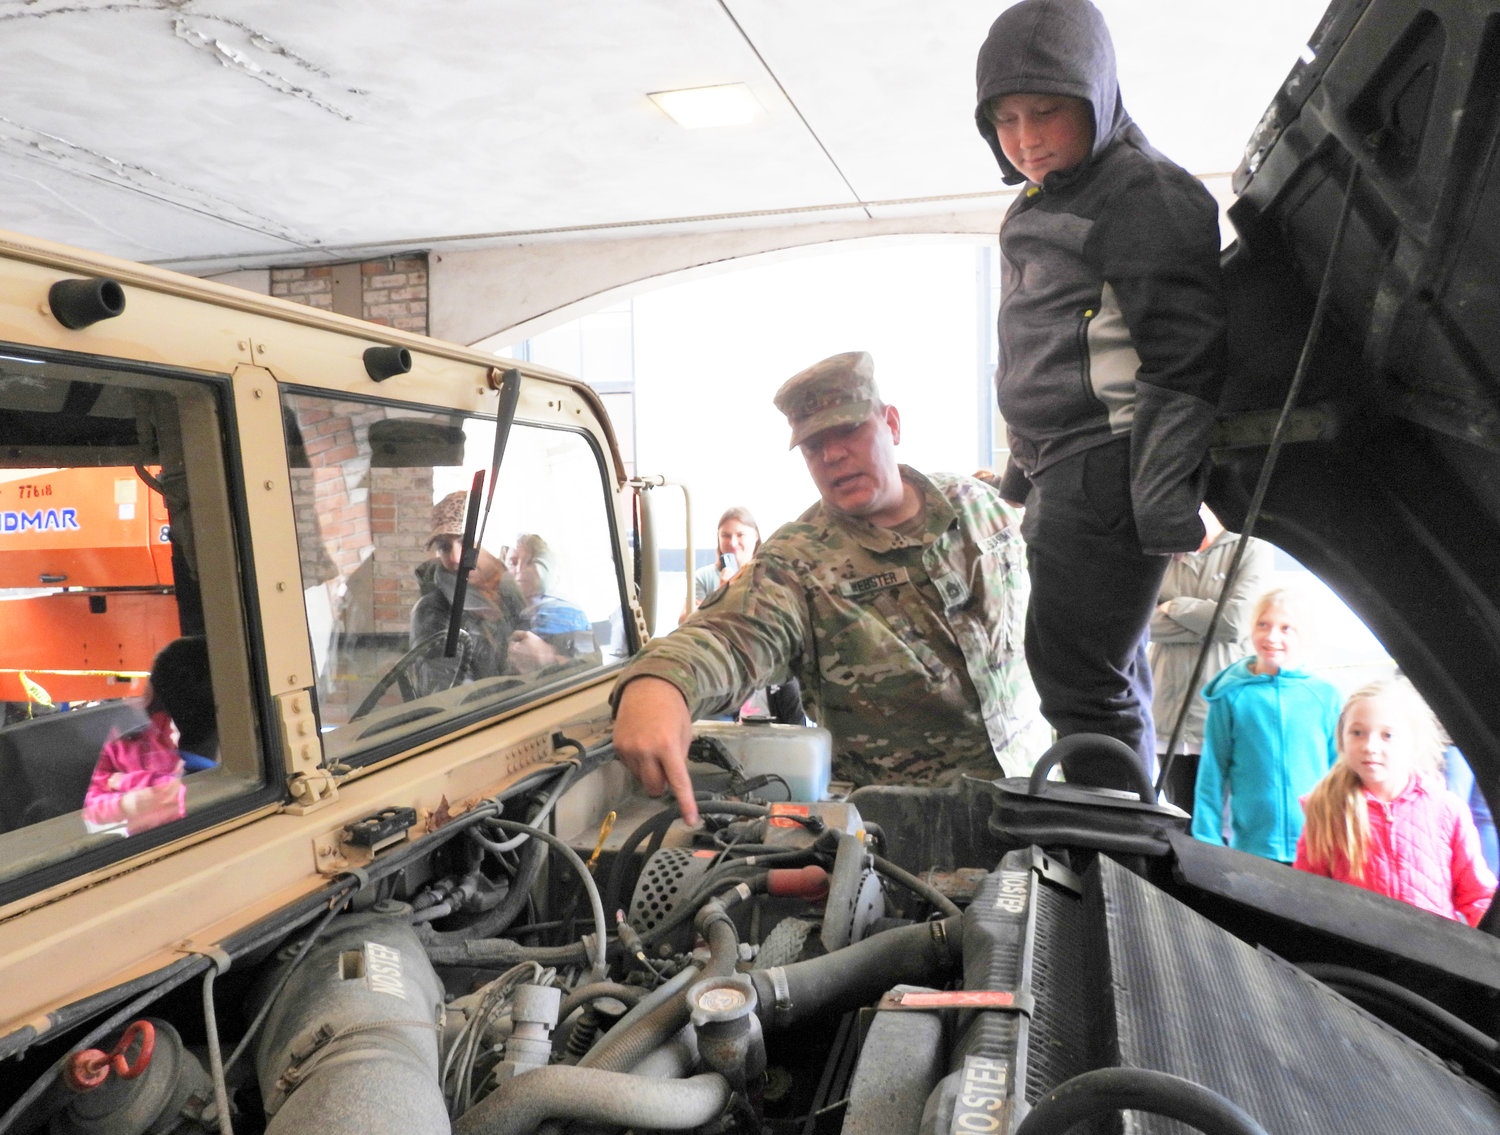 UNDER THE HOOD — A group of curious kids get the opportunity to look under the hood of a military Humvee during a recent demonstration for the homeschooling group that meets at Redeemer Church in Rome.